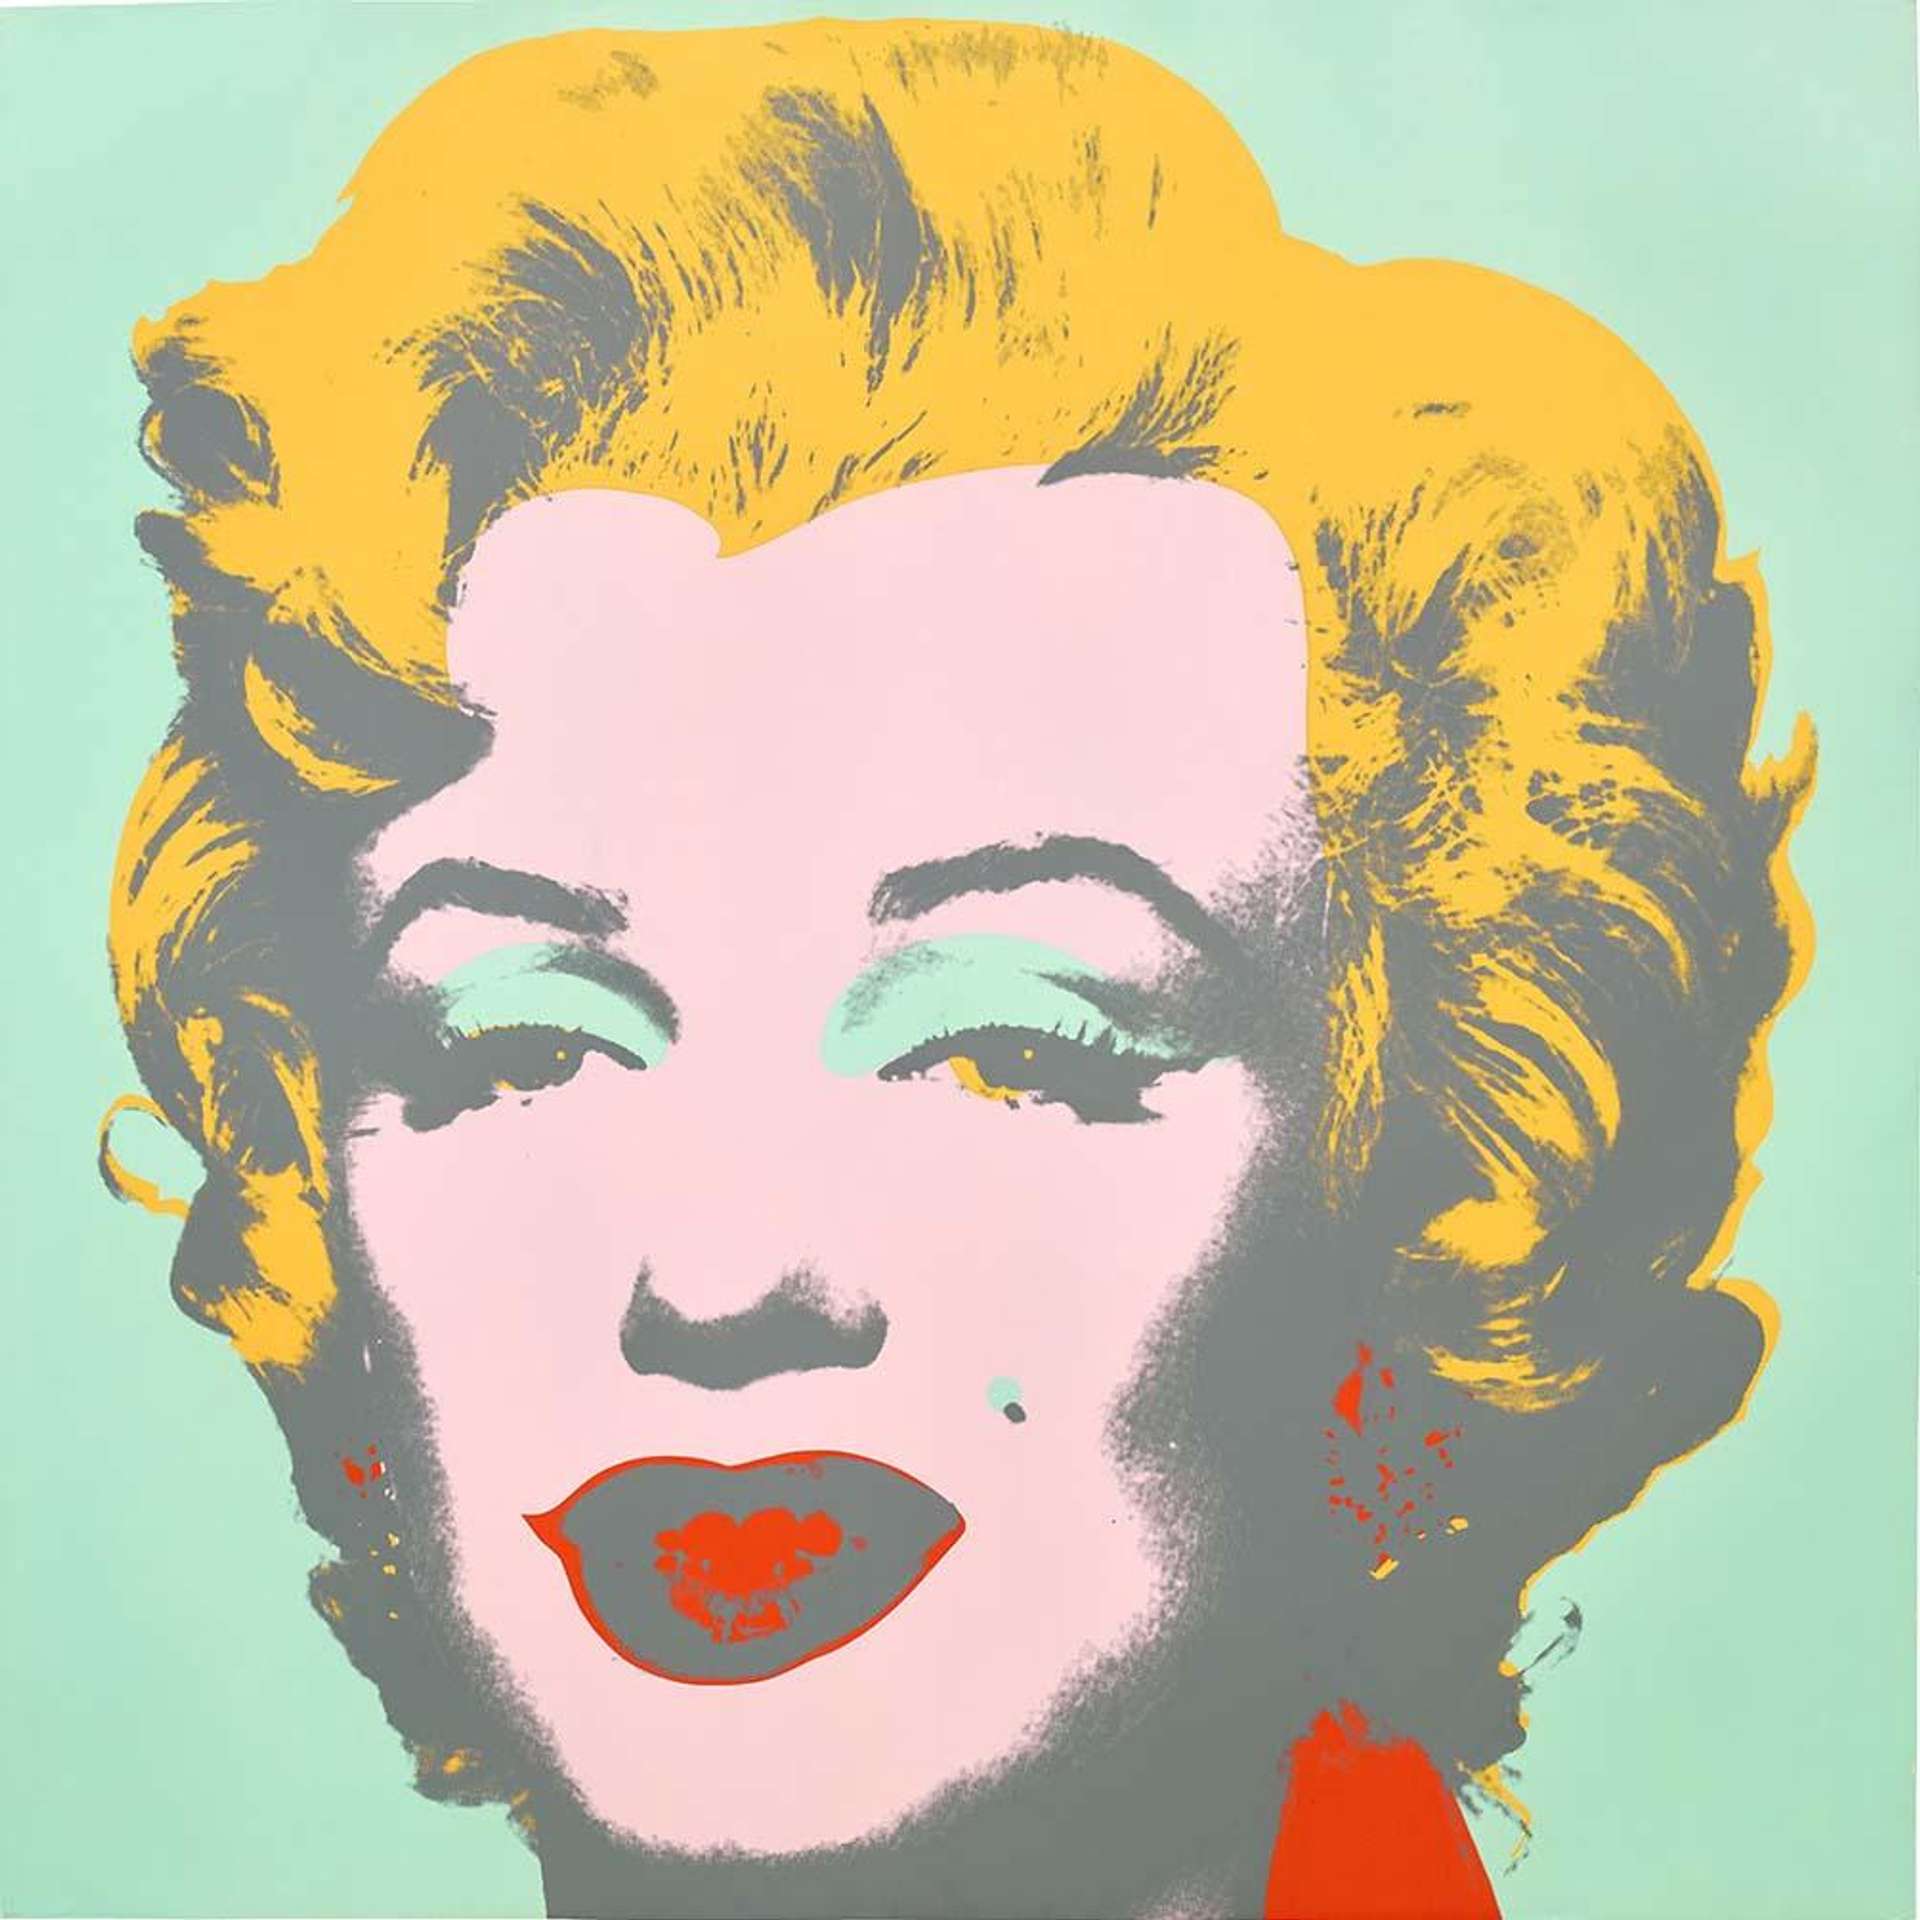 A screenprinted portrait of actress Marilyn Monroe by Pop Artist Andy Warhol. Monroe's face appears at the centre of the composition against a mint green background. The actress' hair is unnaturally coloured in a flat canary yellow, her eyelids in the same mint green as the background, and her lips printed in bight red.